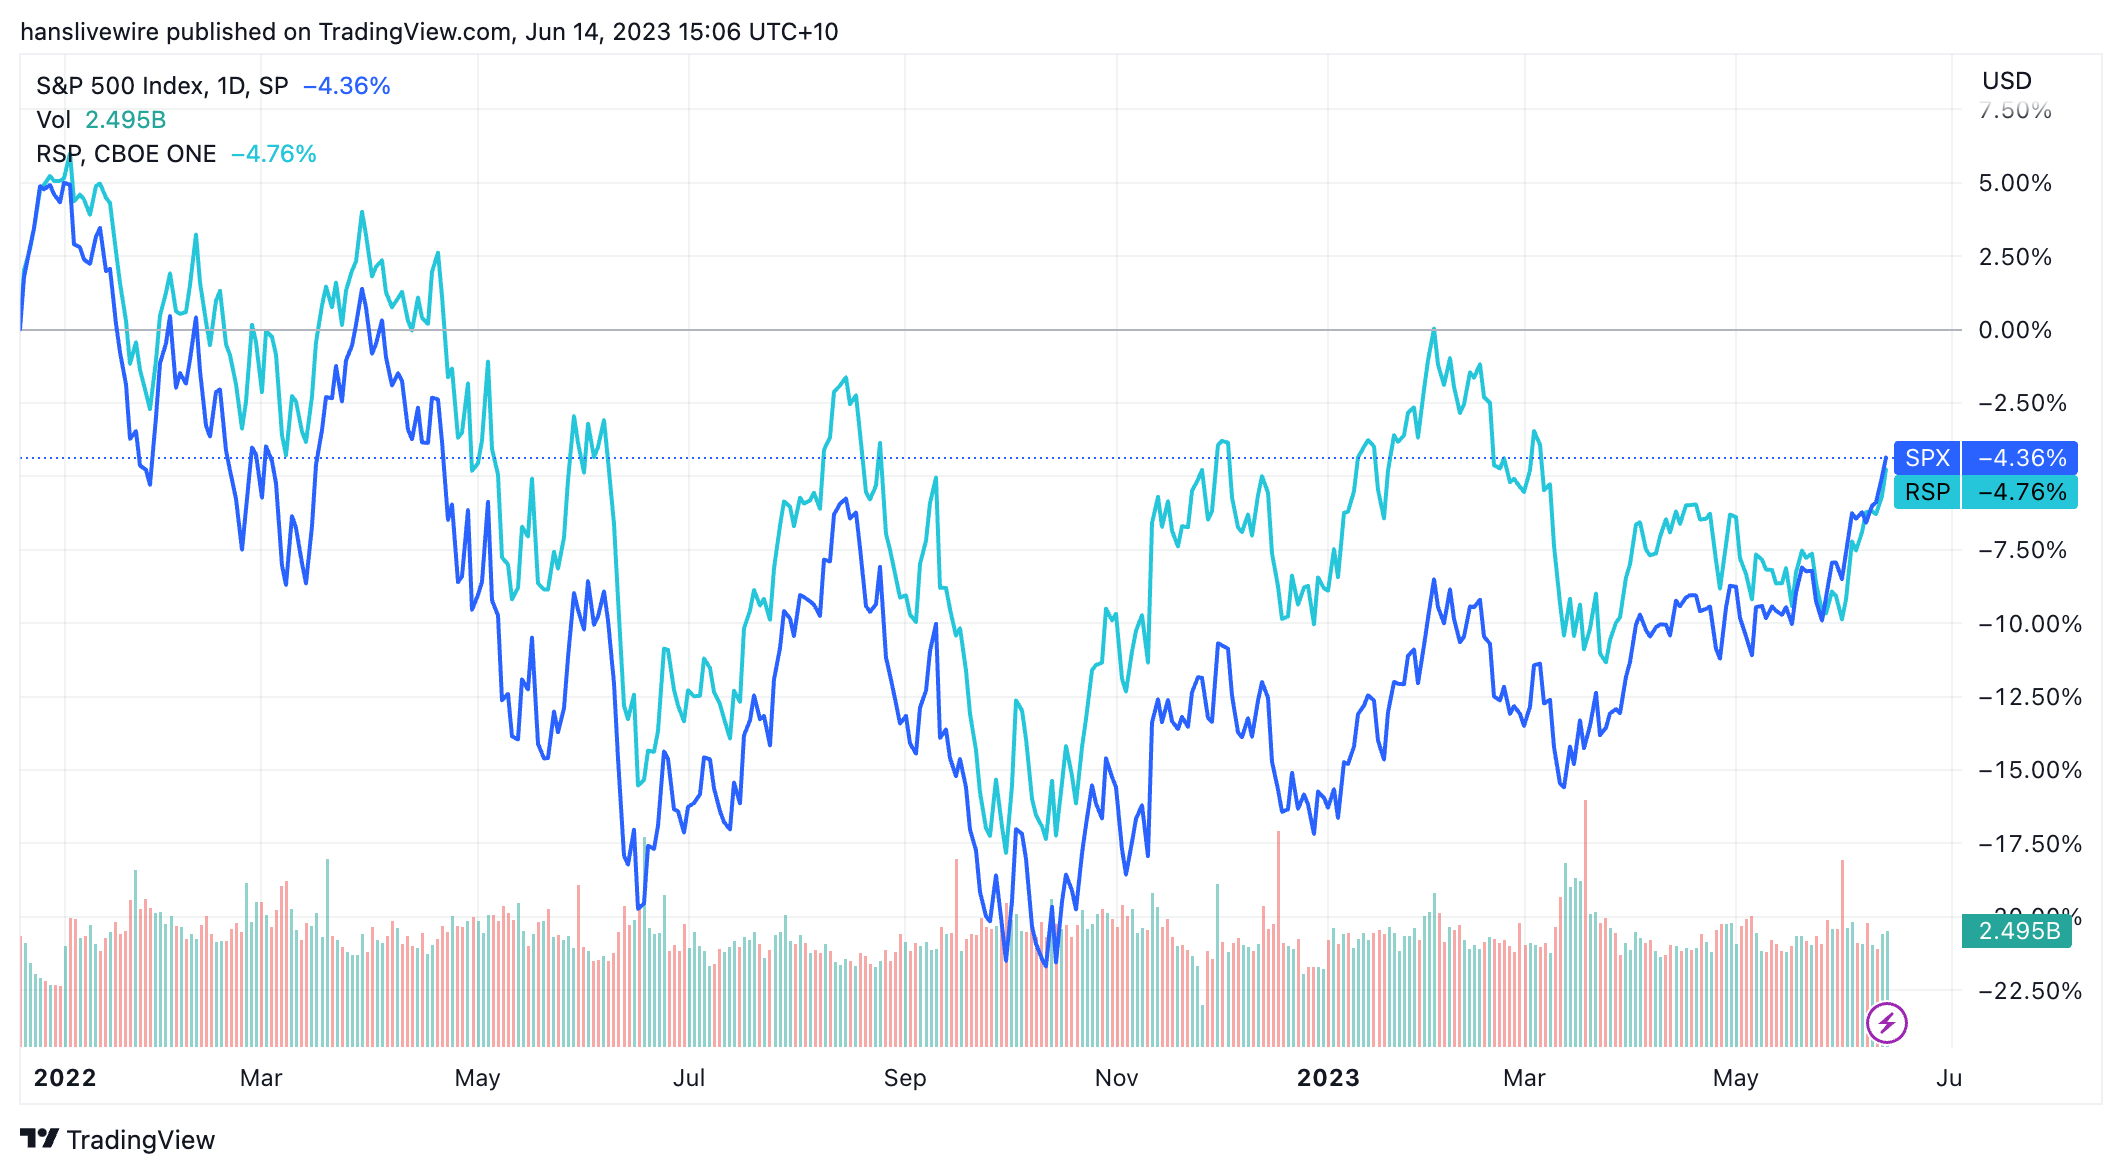 S&P 500 and S&P 500 Equal Weighted Index since January 2022 (Source: Trading View)